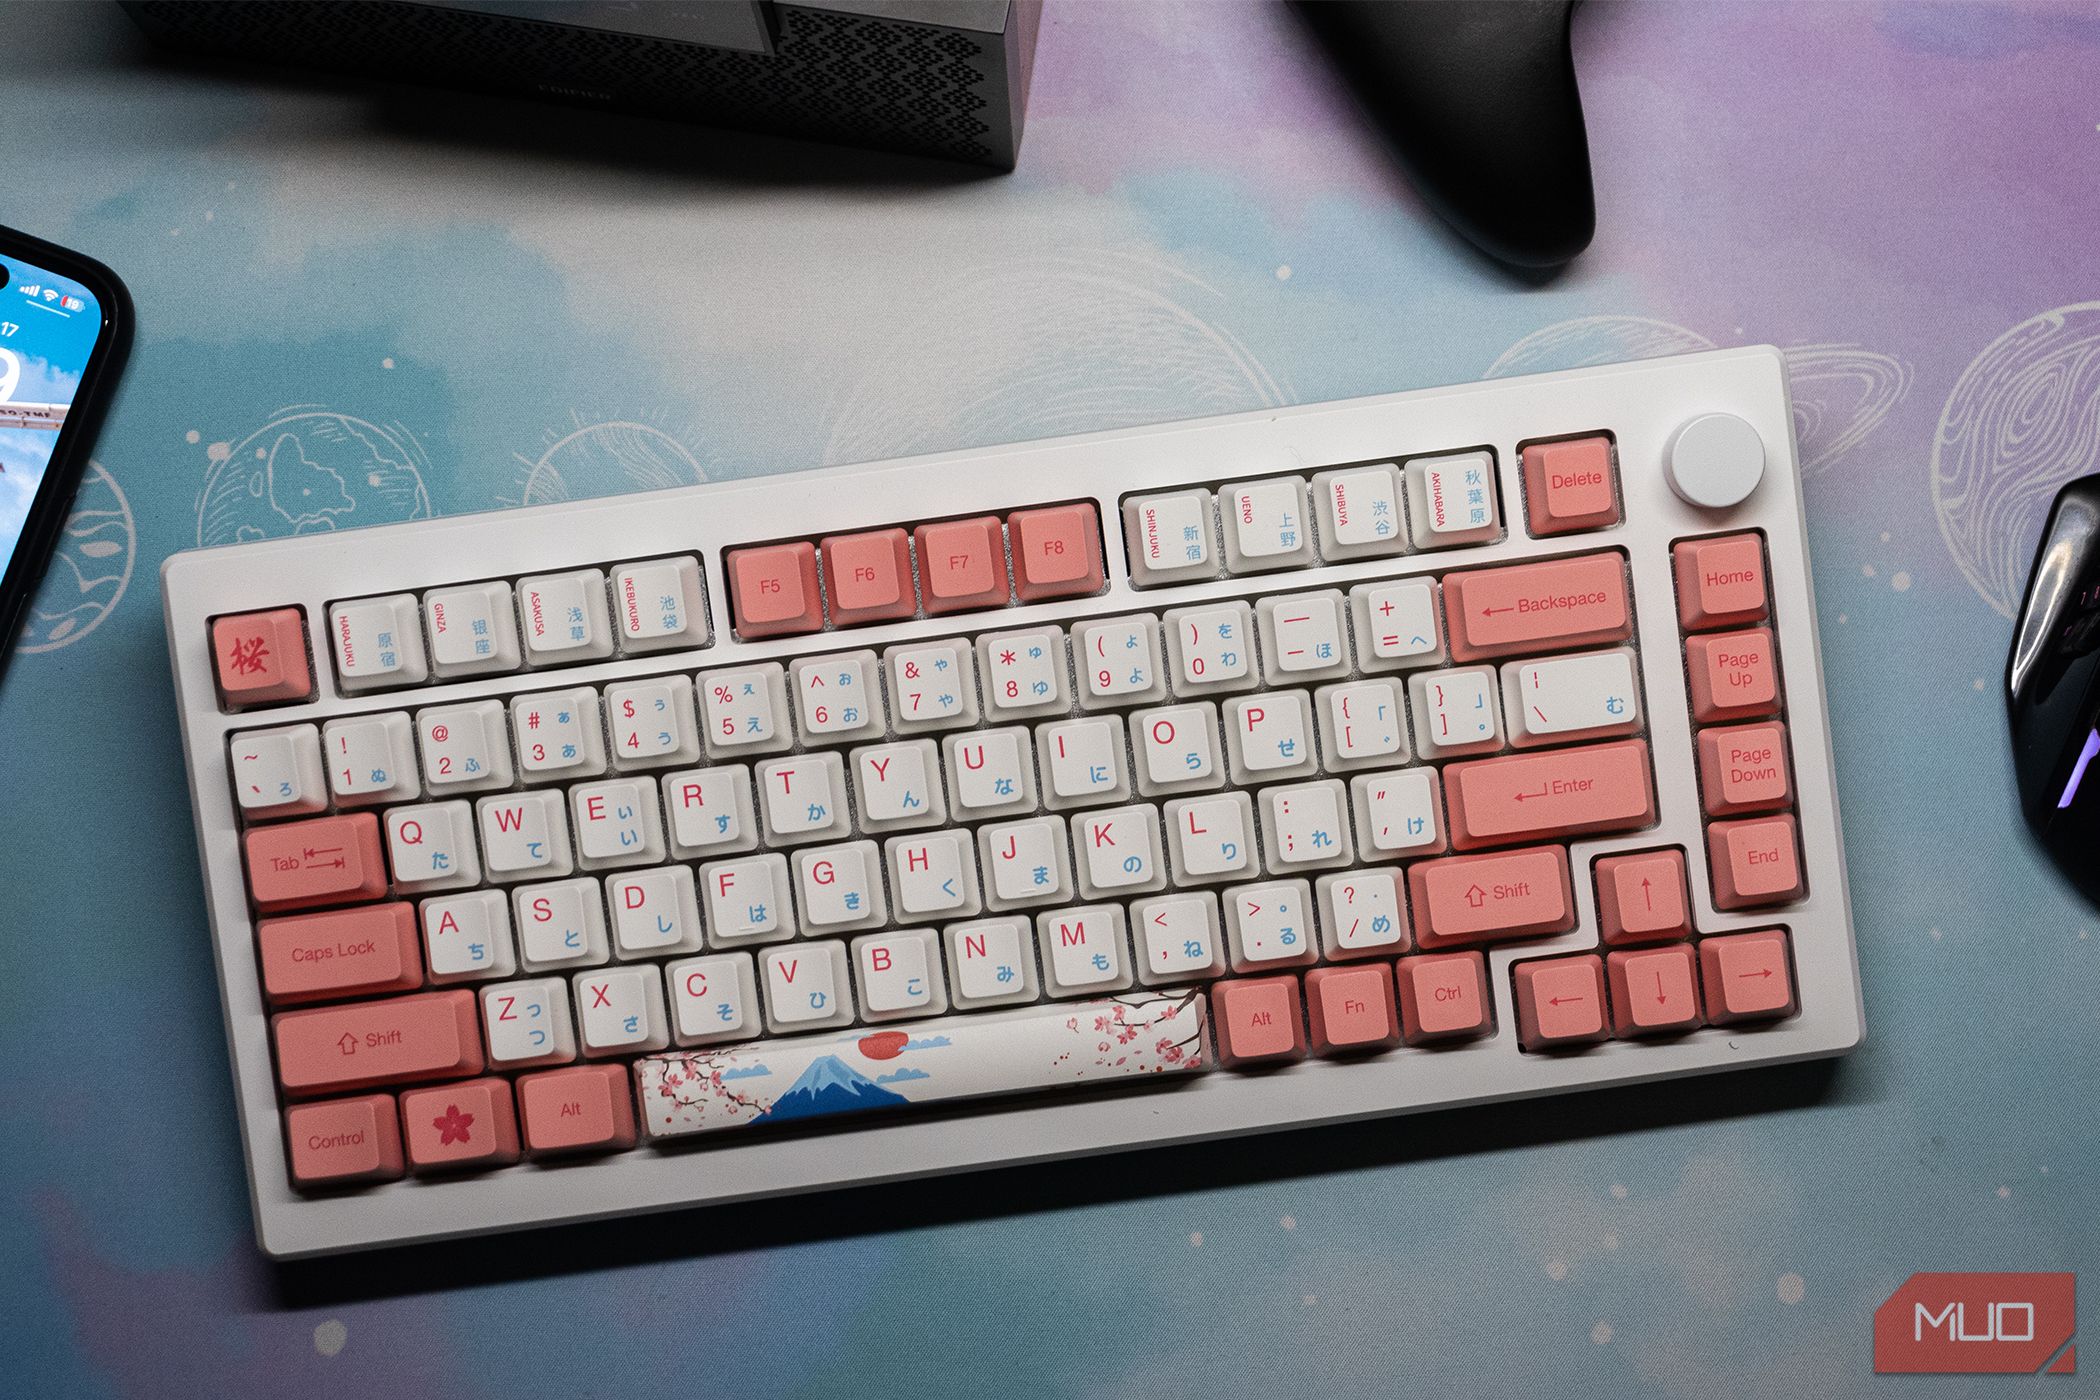 Akko MOD007B Hall Effect Keyboard Review: For Serious Gamers